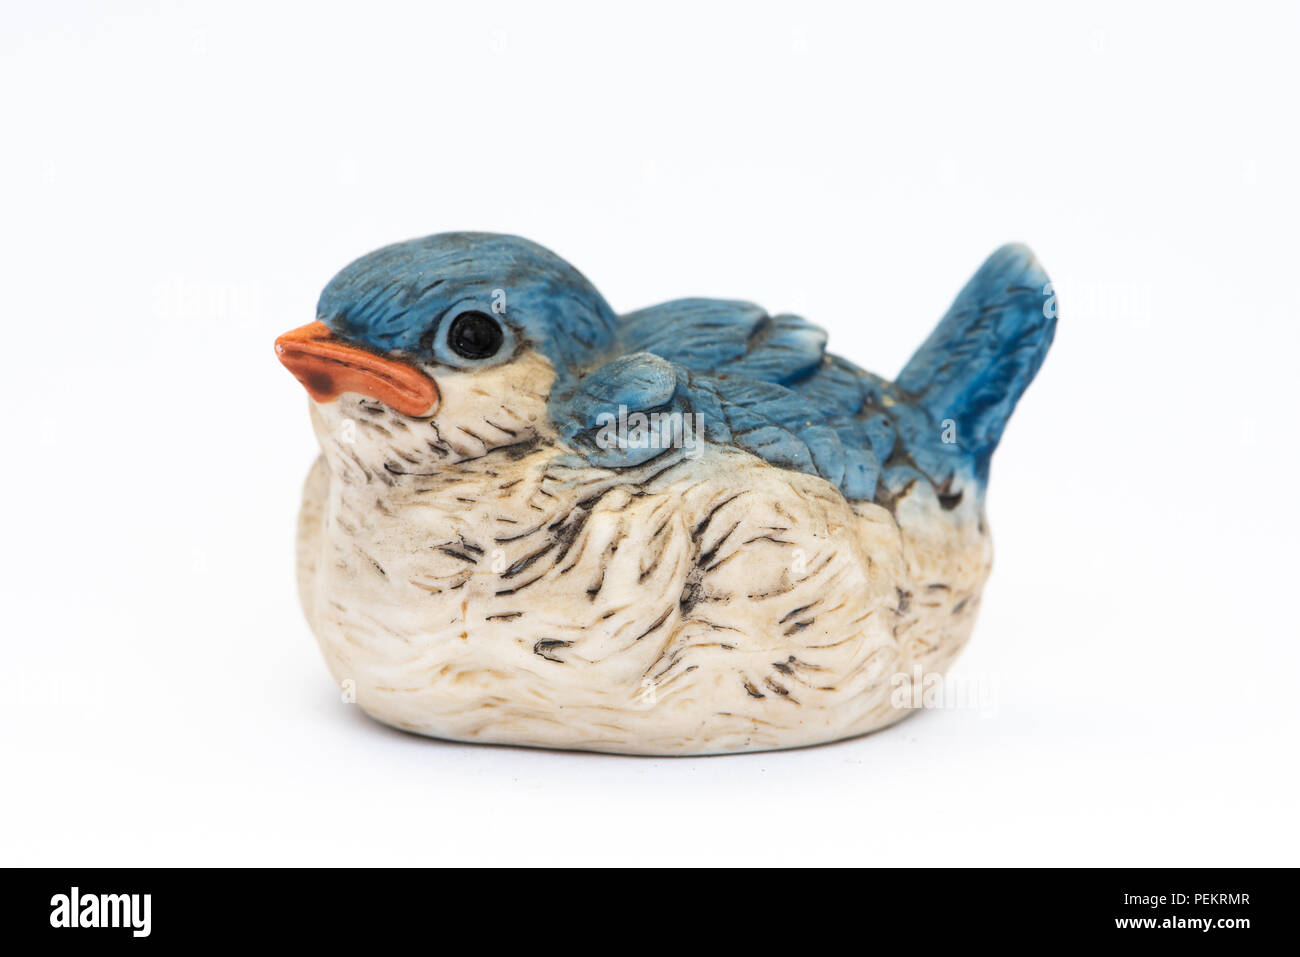 A vintage cute little ceramic blue bird figurine isolated on white. Stock Photo